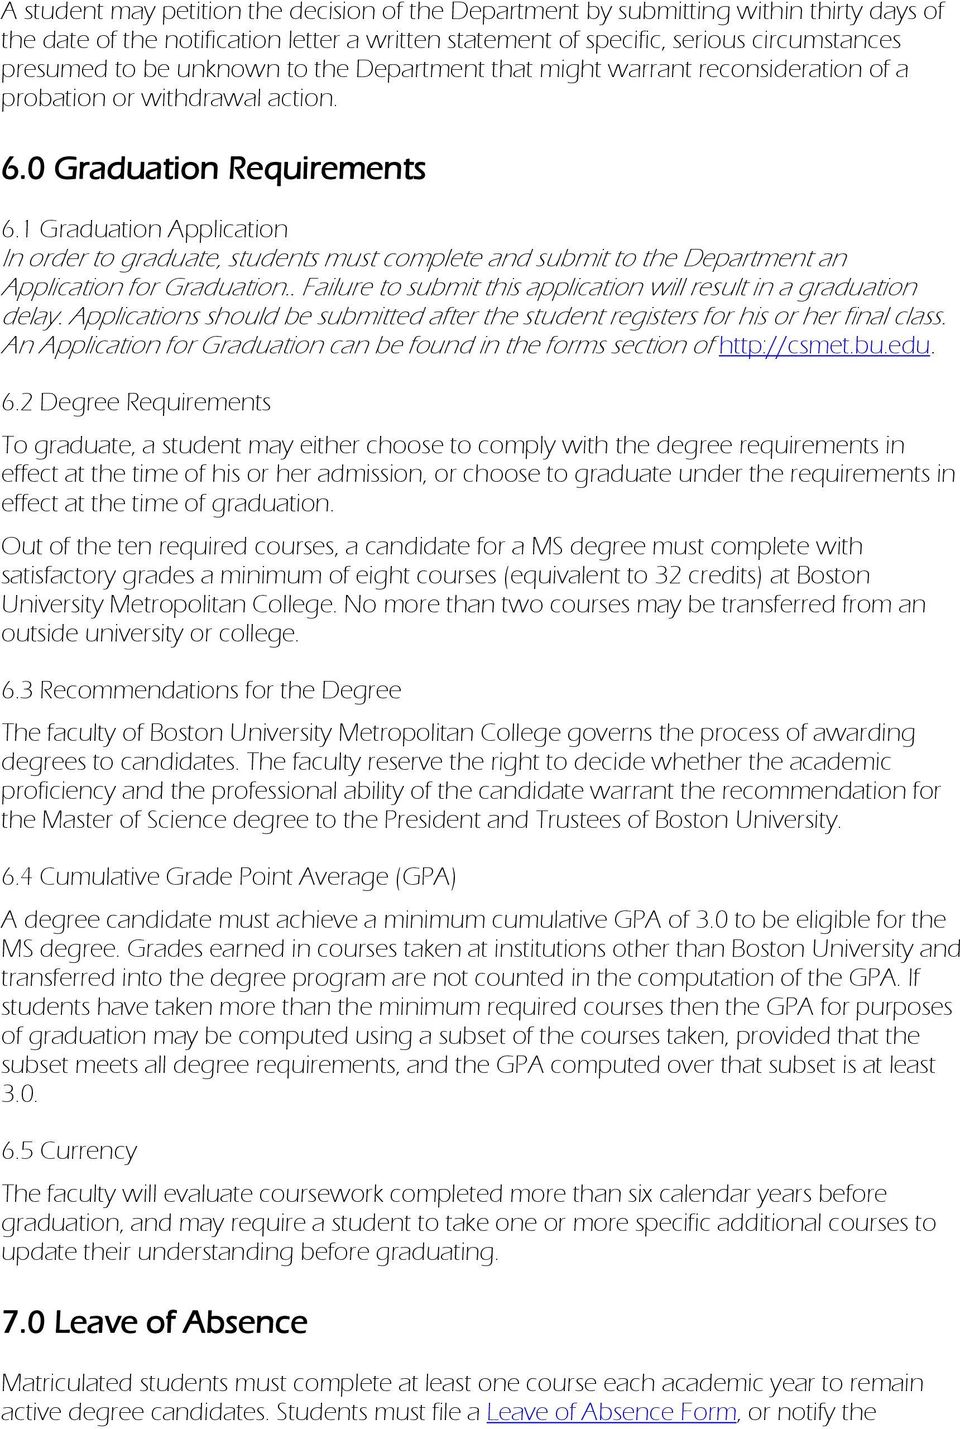 1 Graduation Application In order to graduate, students must complete and submit to the Department an Application for Graduation.. Failure to submit this application will result in a graduation delay.